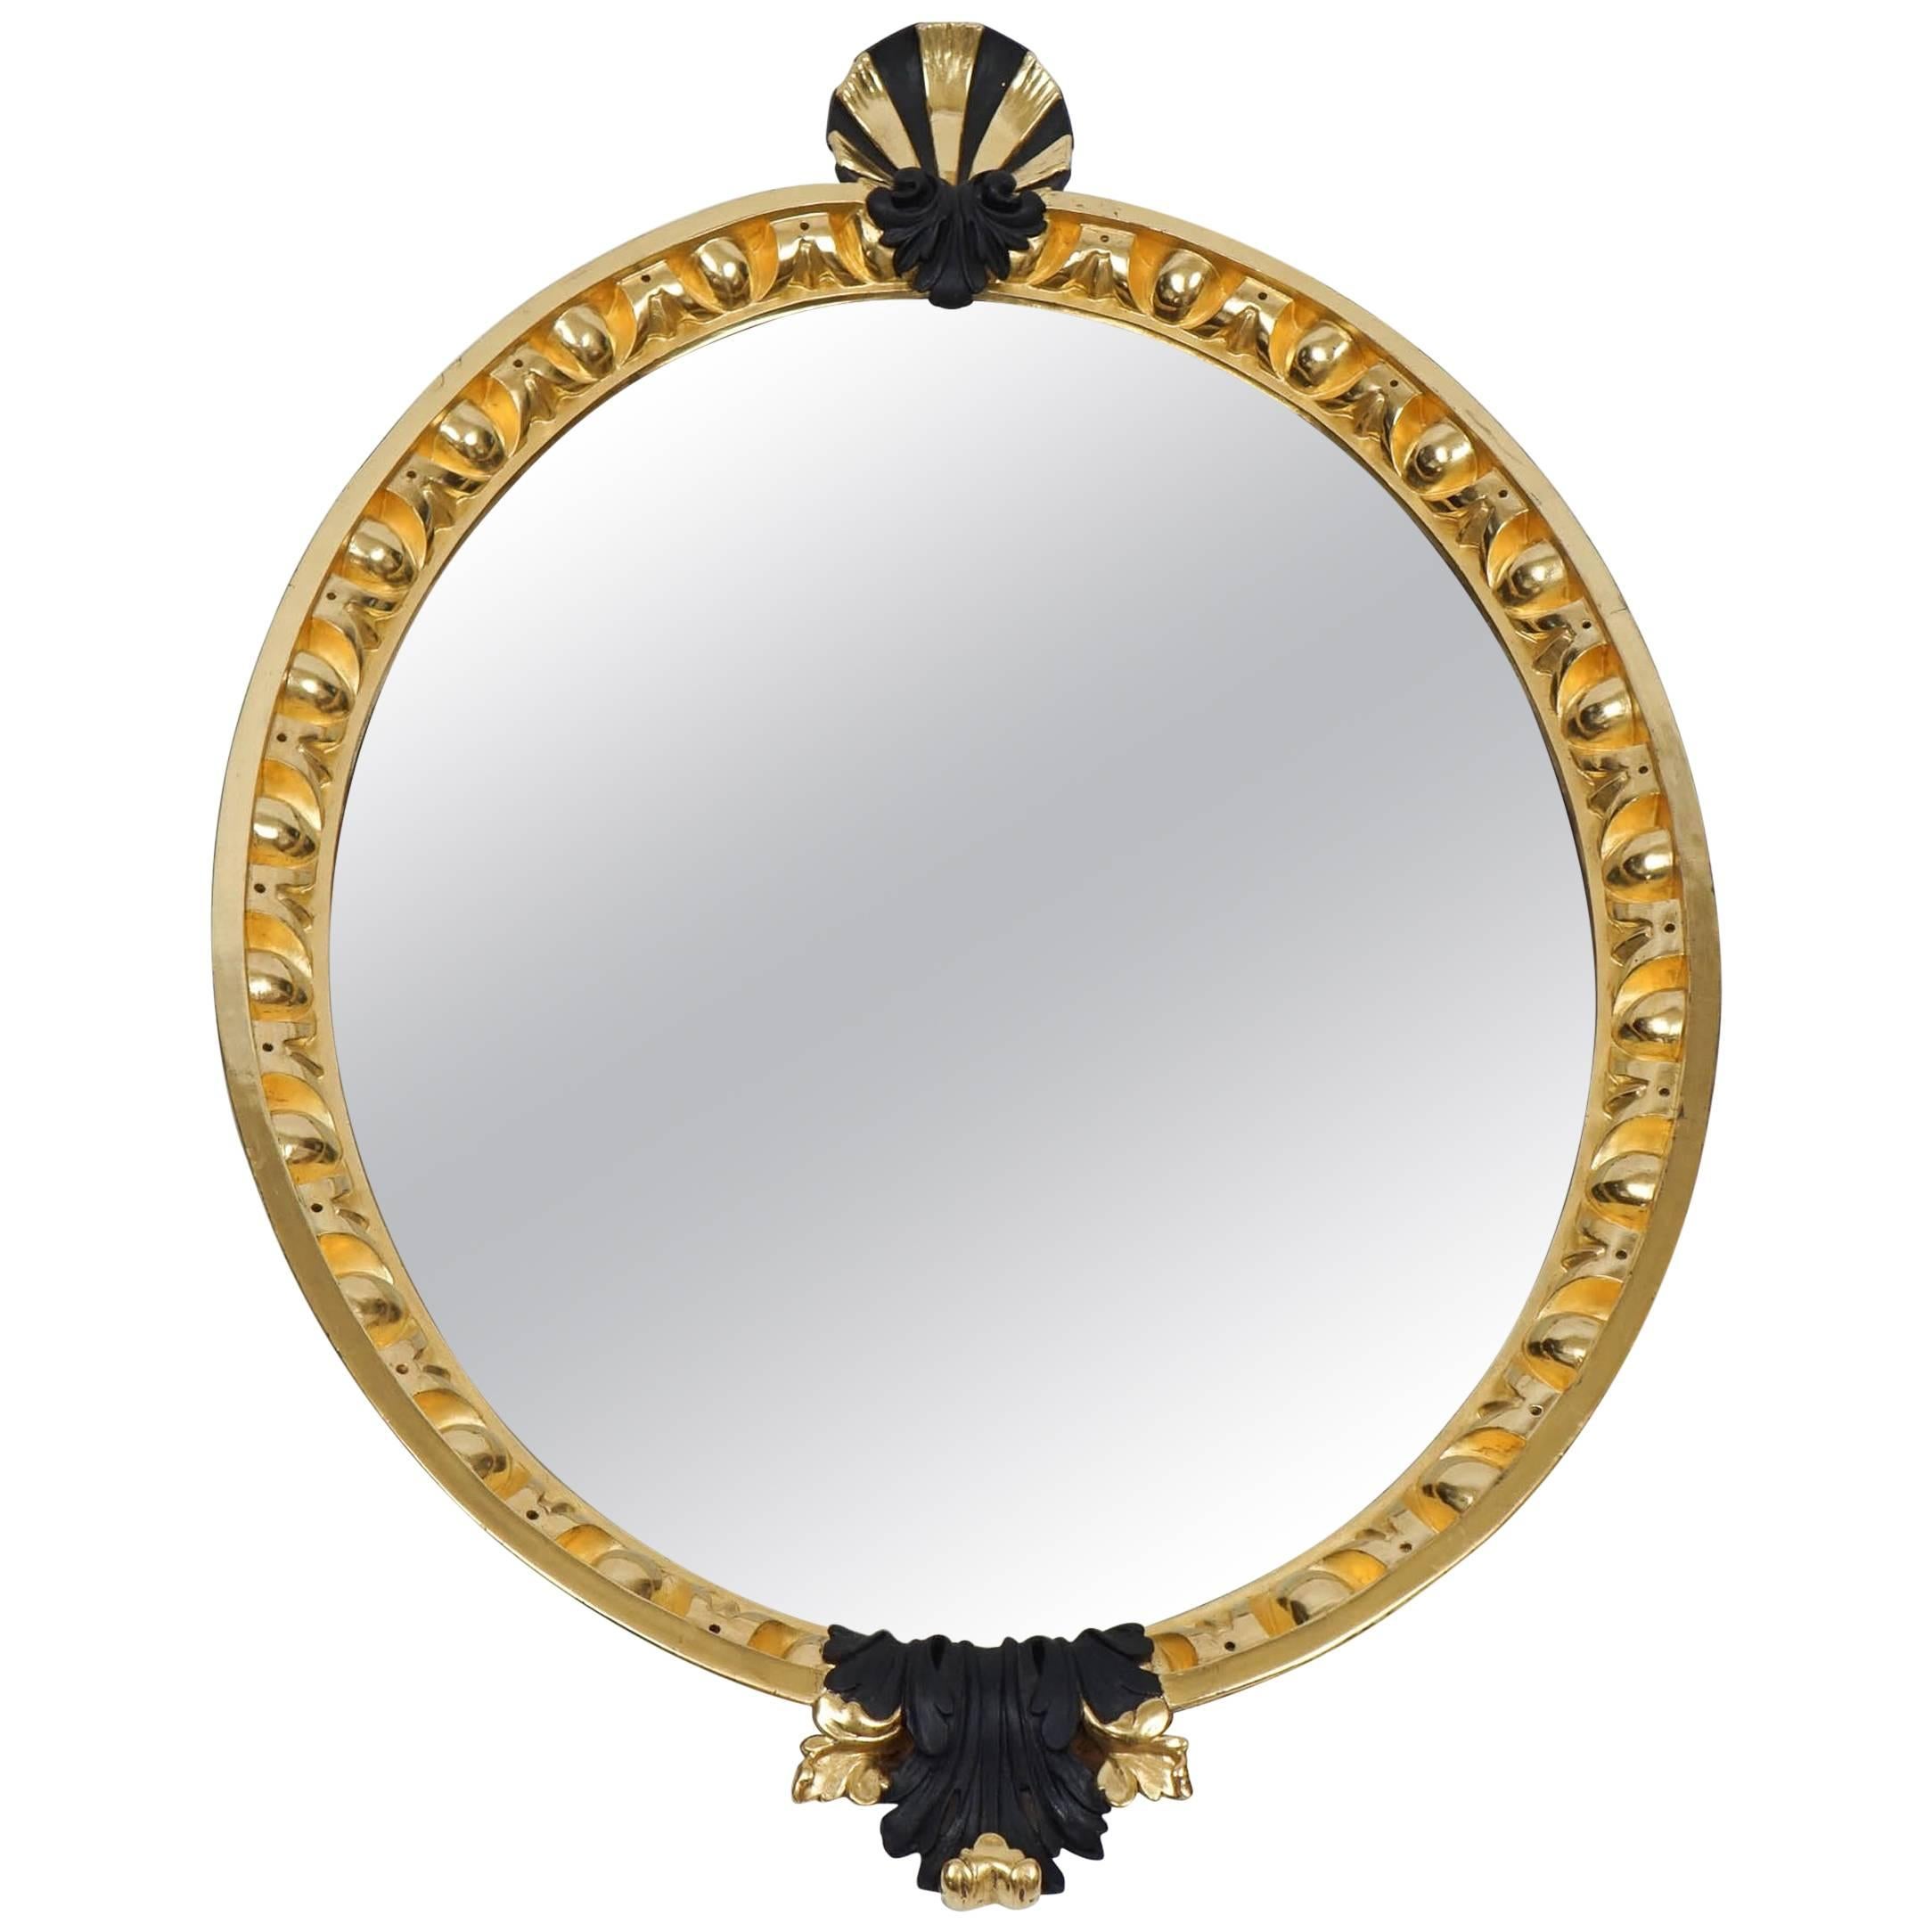 George II Gilt and Ebonized Looking Glass Mirror after William Kent, circa 1740